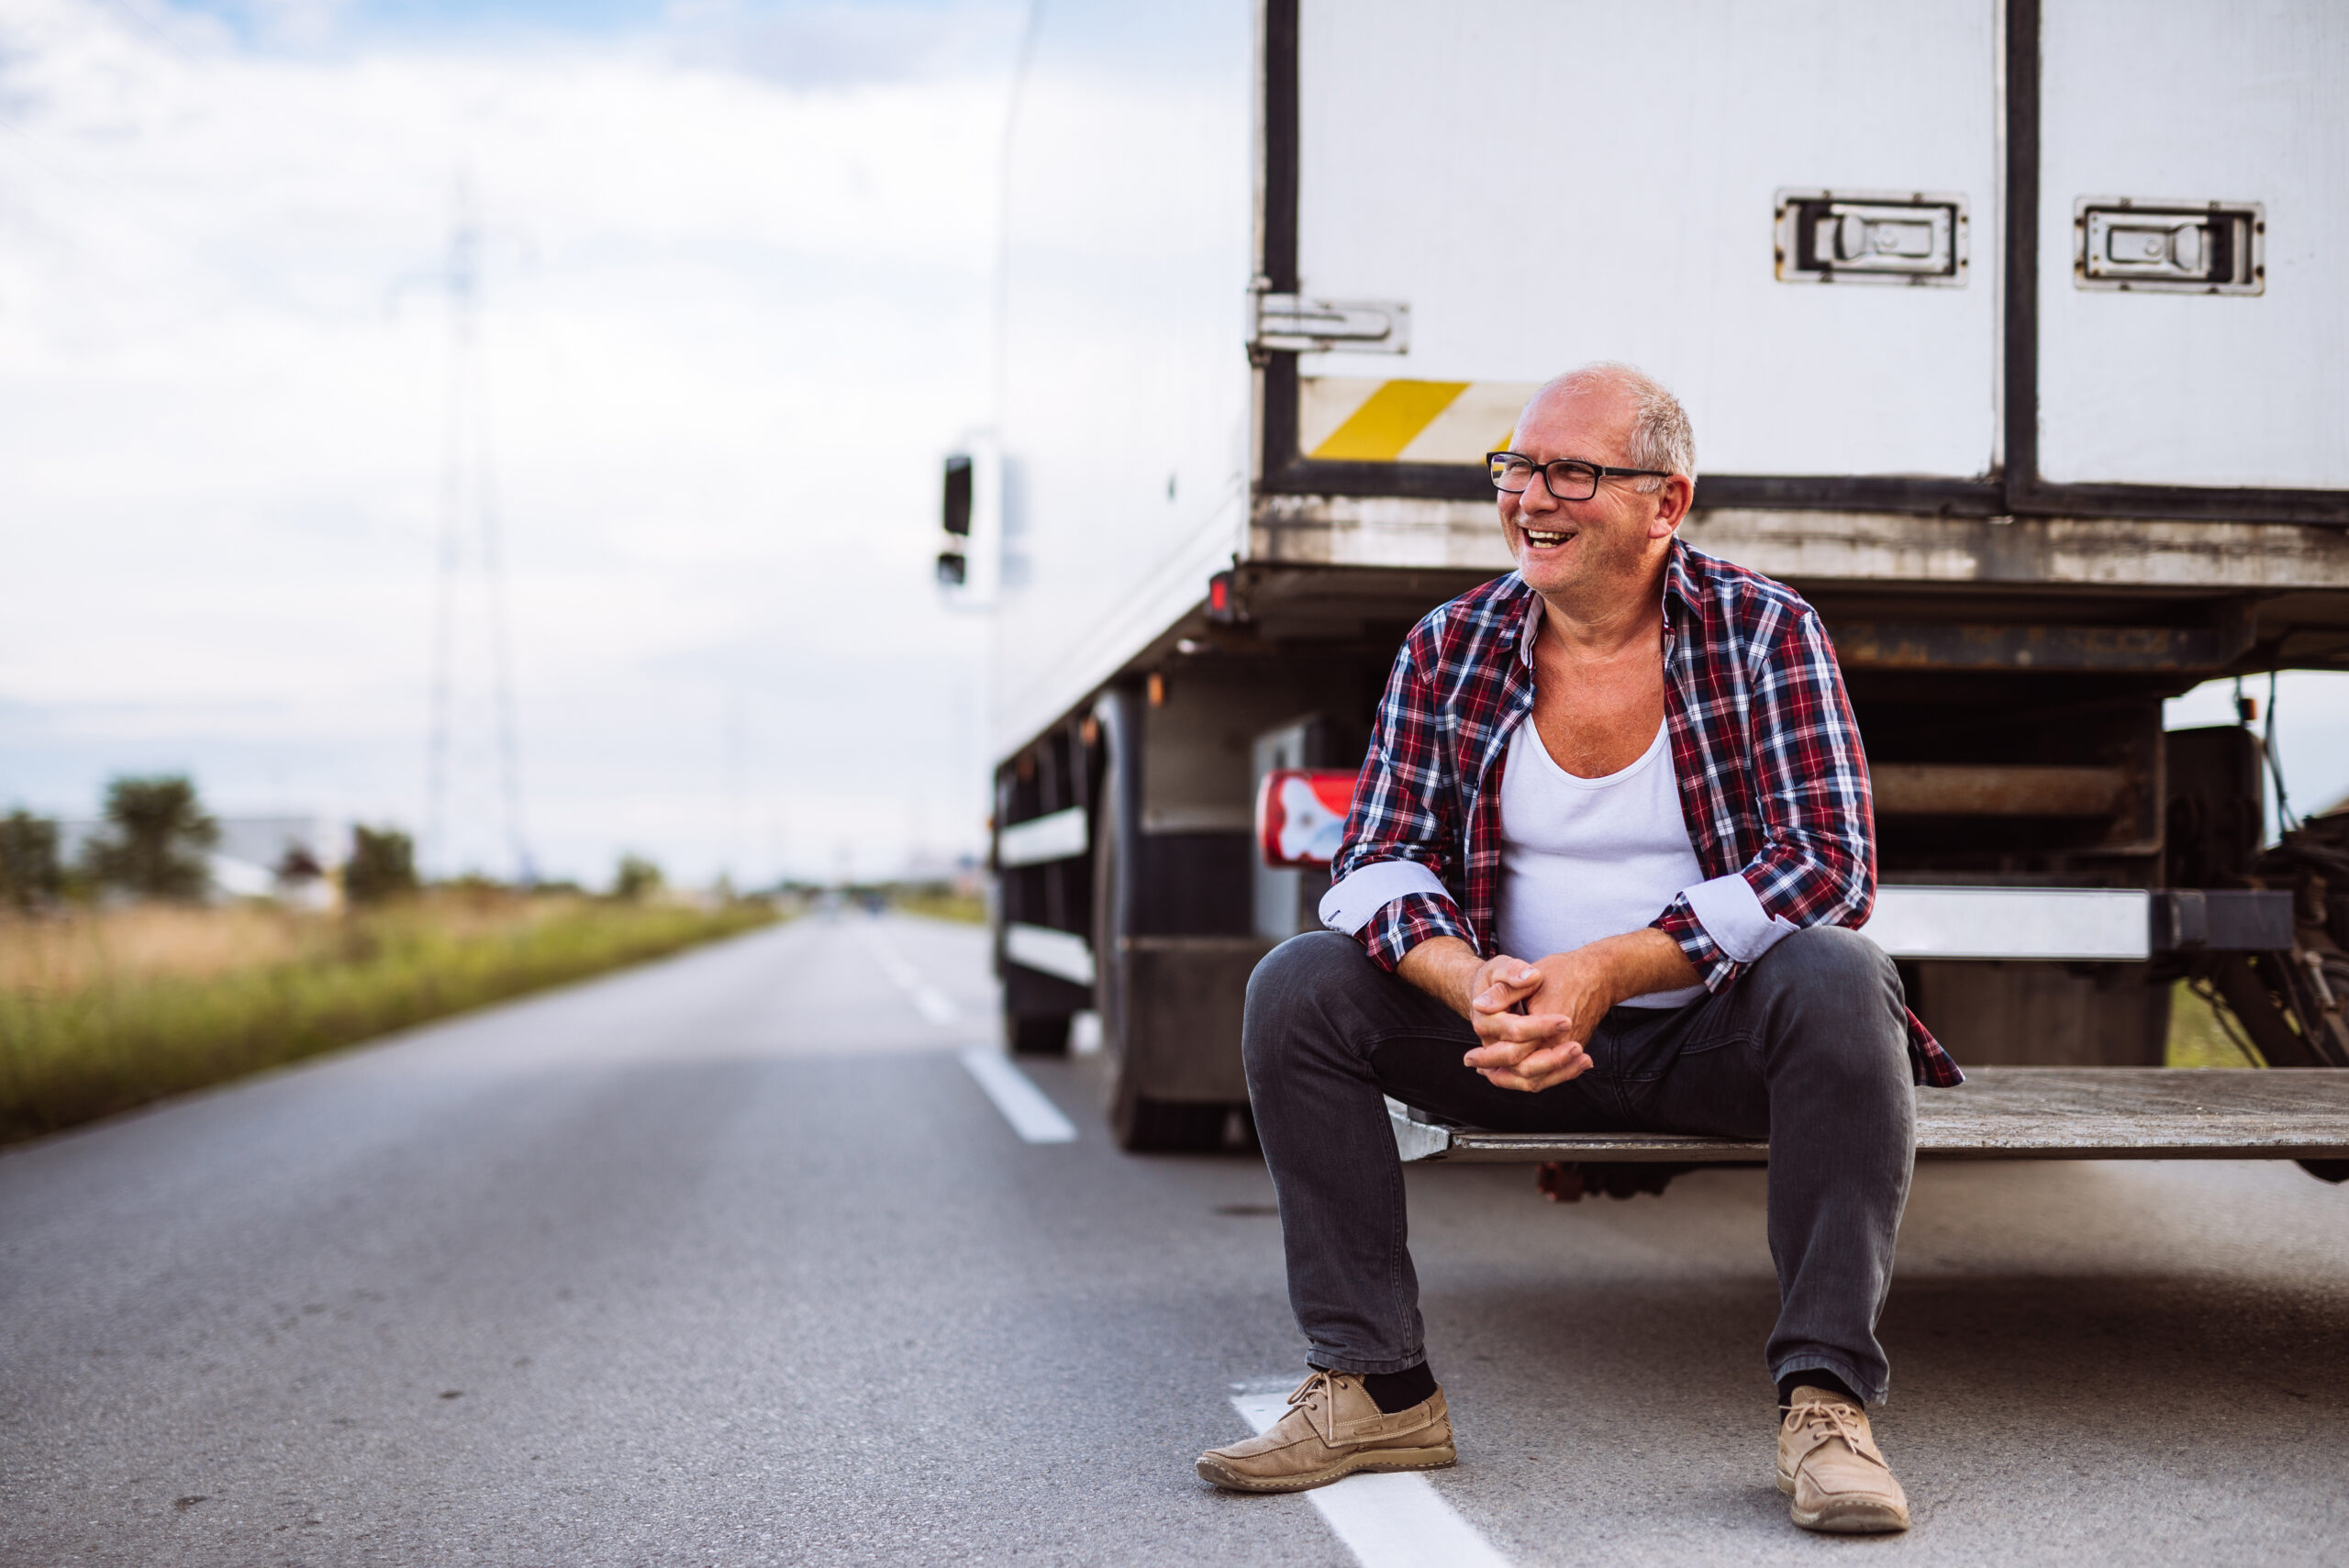 People who need self-care the most aren’t getting it. Just ask a trucker.